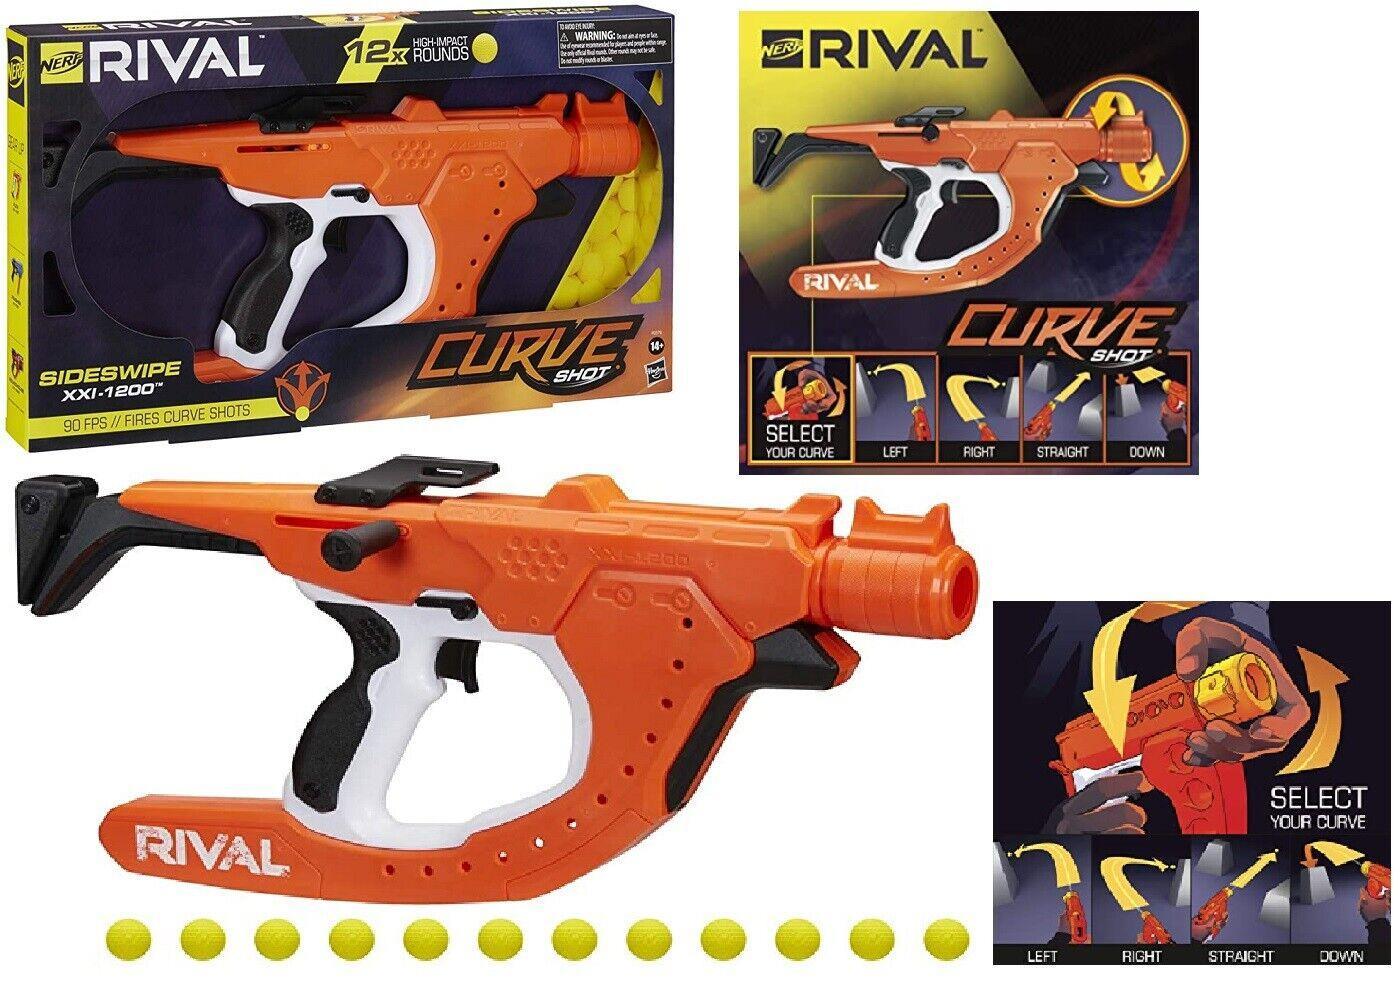 NERF Rival Curve Shot Sideswipe XXI-1200 Blaster 12 Rounds Ages 1